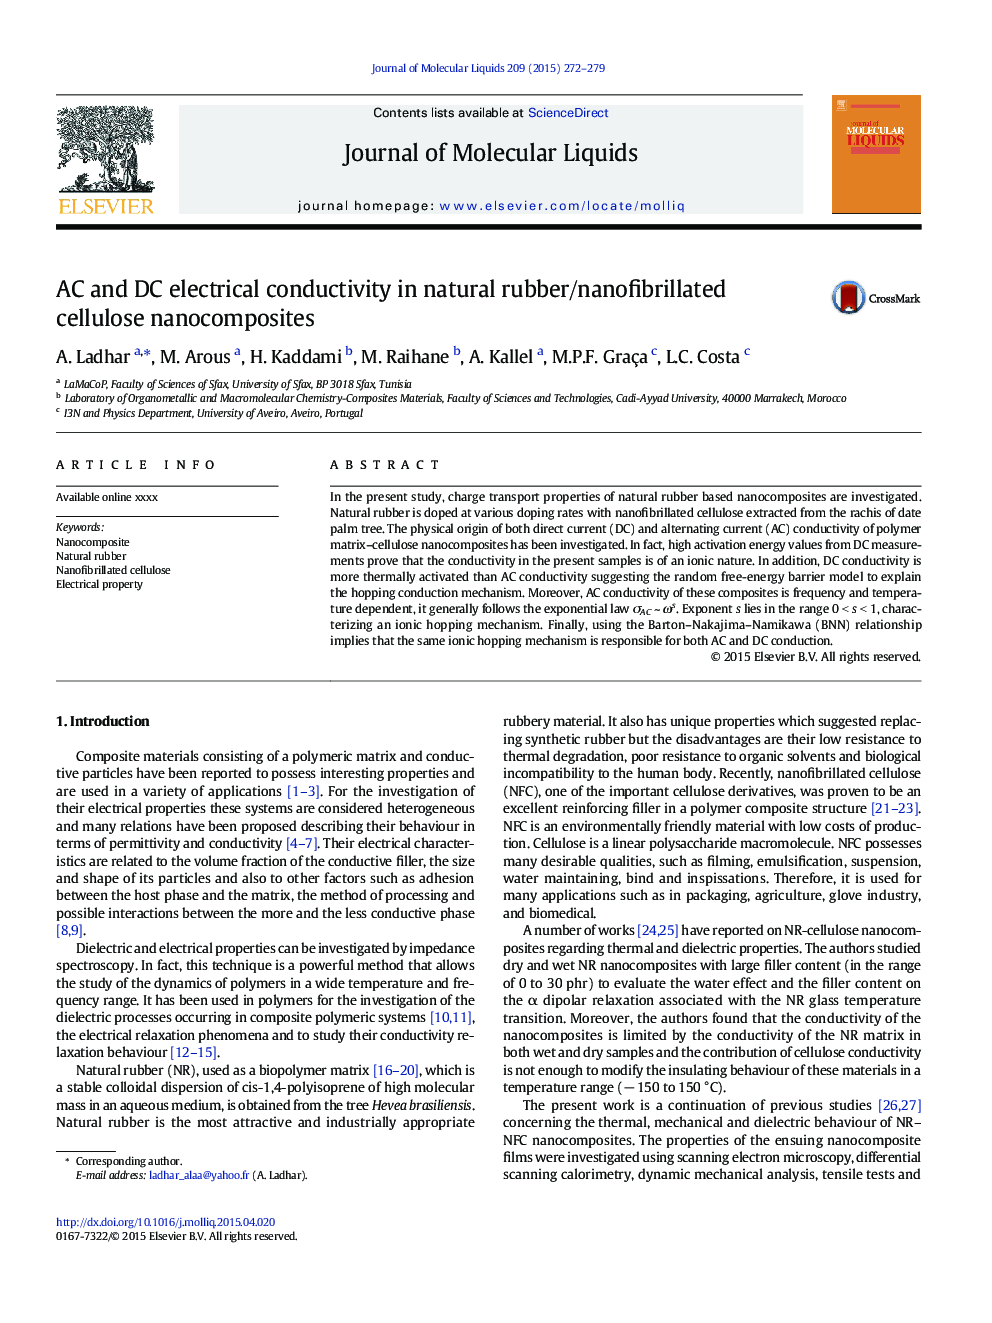 AC and DC electrical conductivity in natural rubber/nanofibrillated cellulose nanocomposites